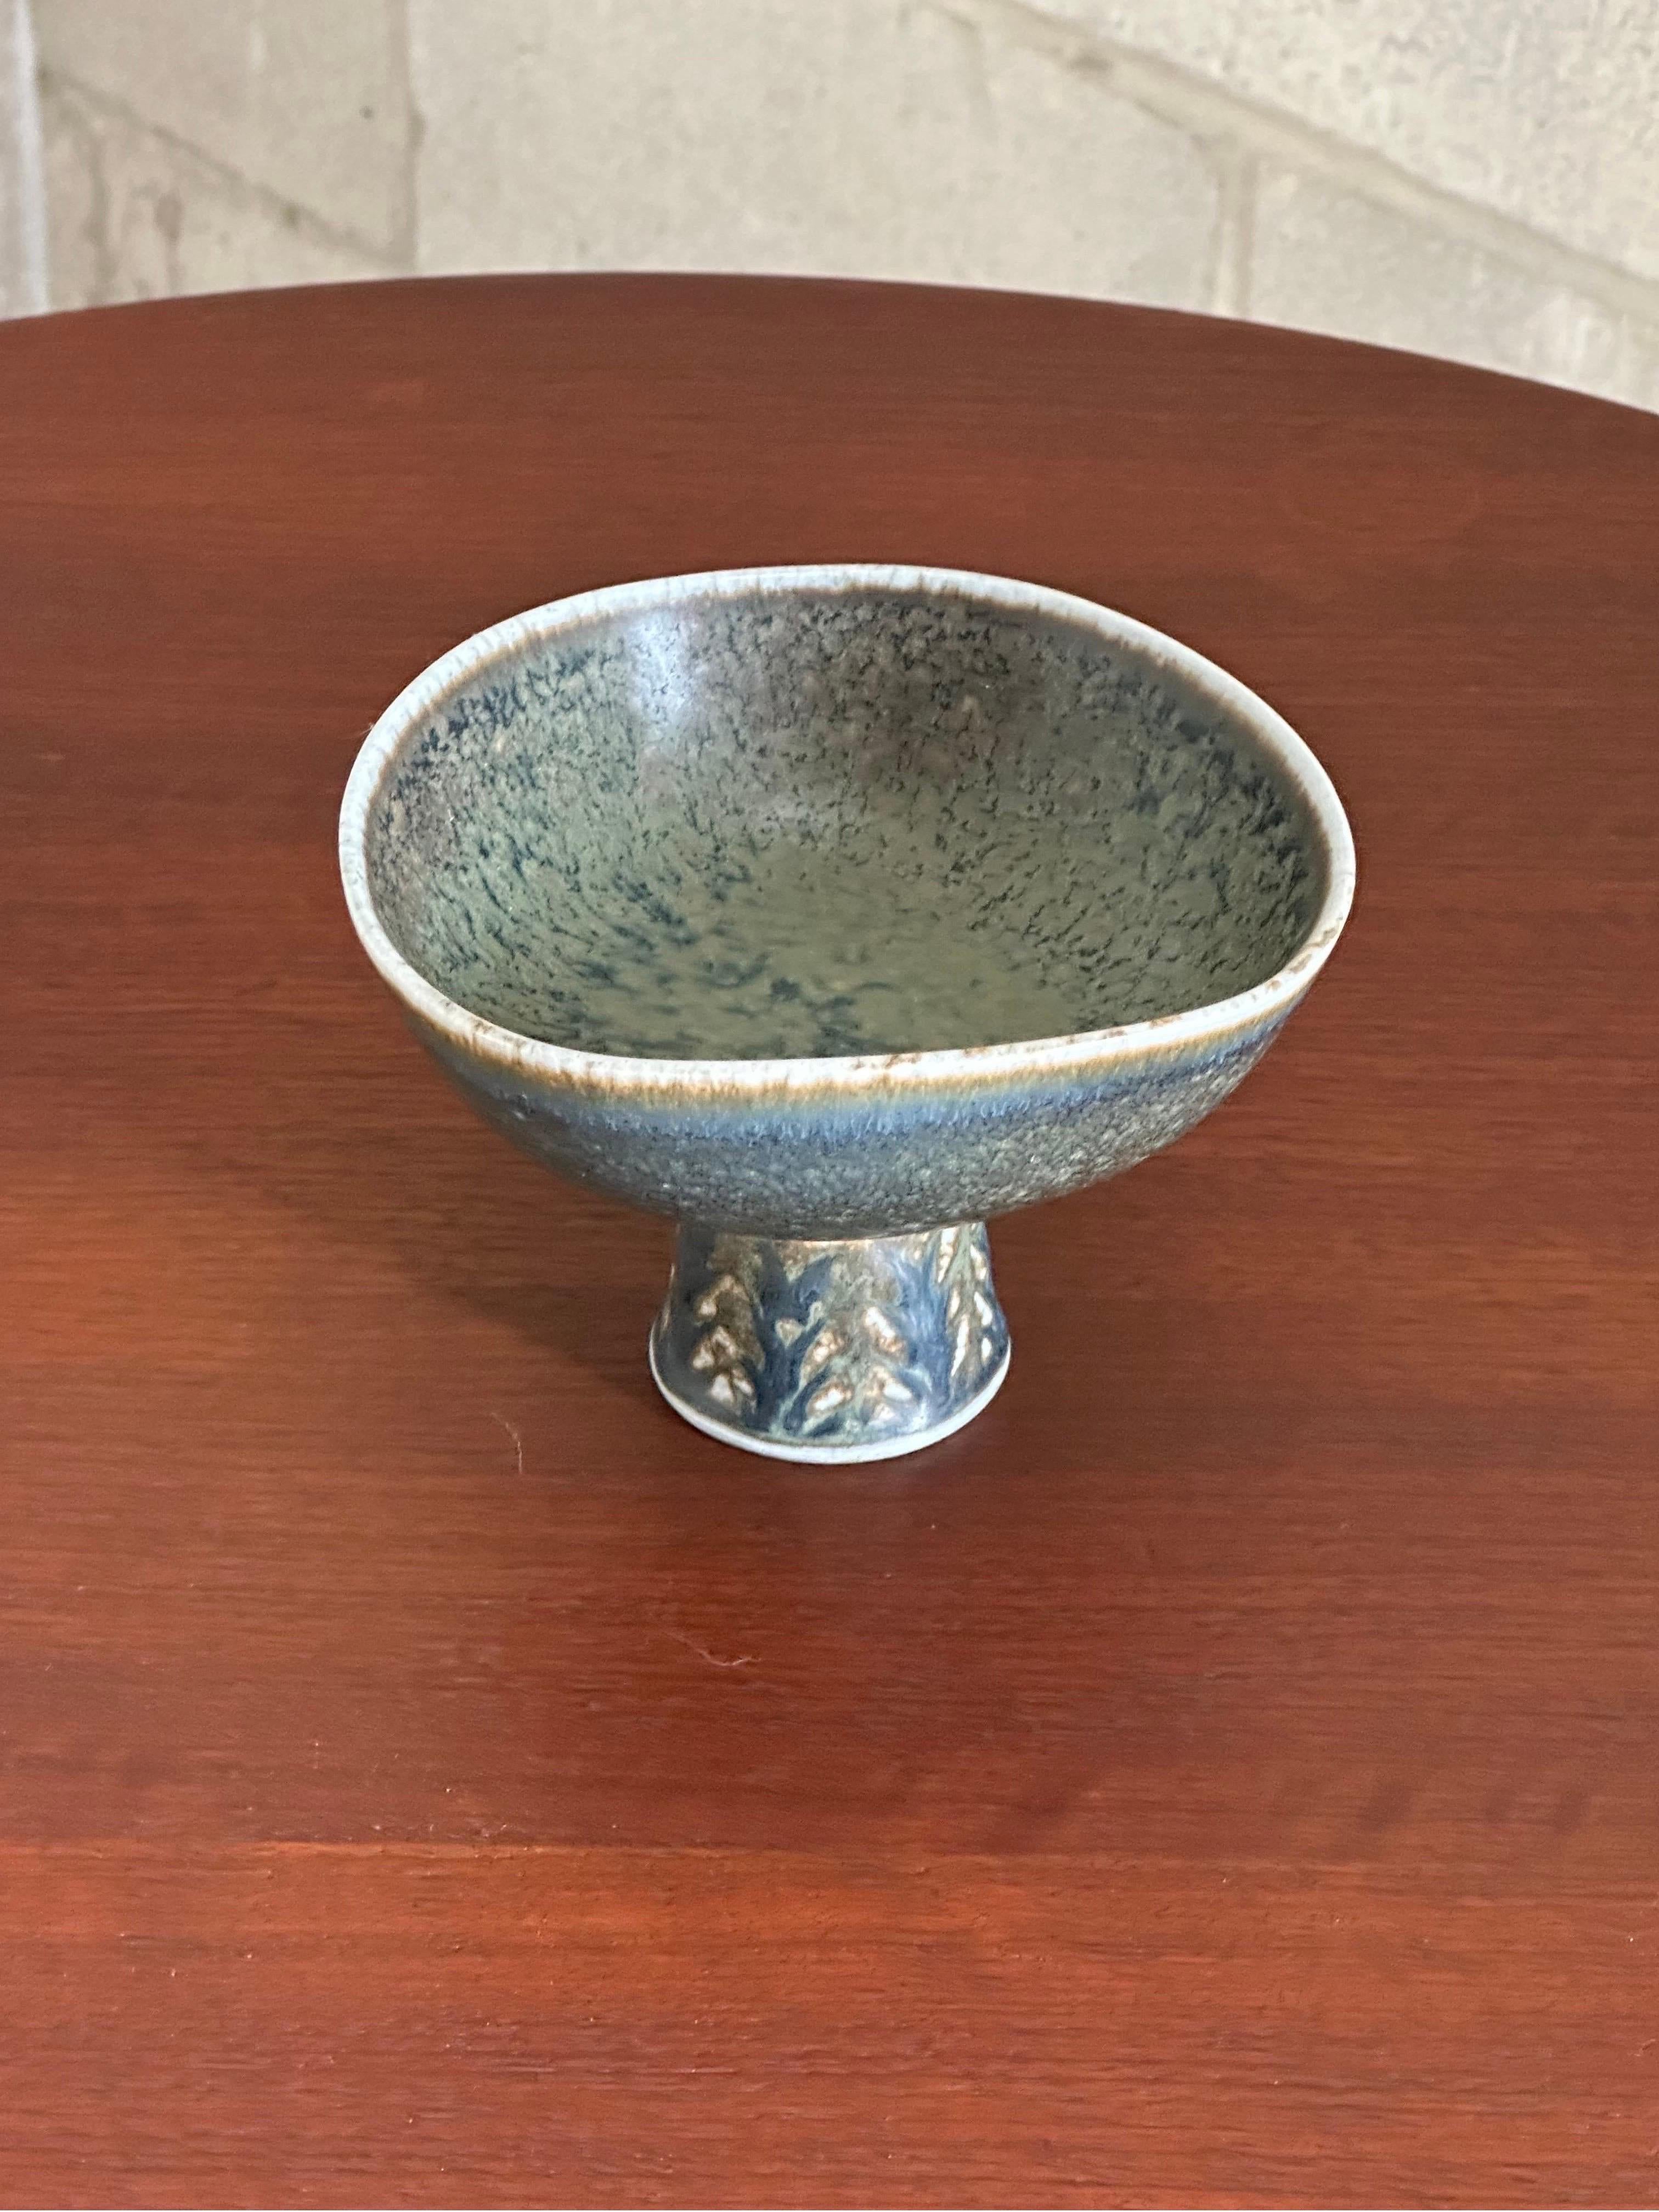 Wonderful footed bowl designed by Carl-Harry Stålhane for Rörstrand. Features a footed base with rounded freeform bowl. Lovely glaze and colors with blue, green, and brown.

Would work well in a variety of interiors including modern, mid century,